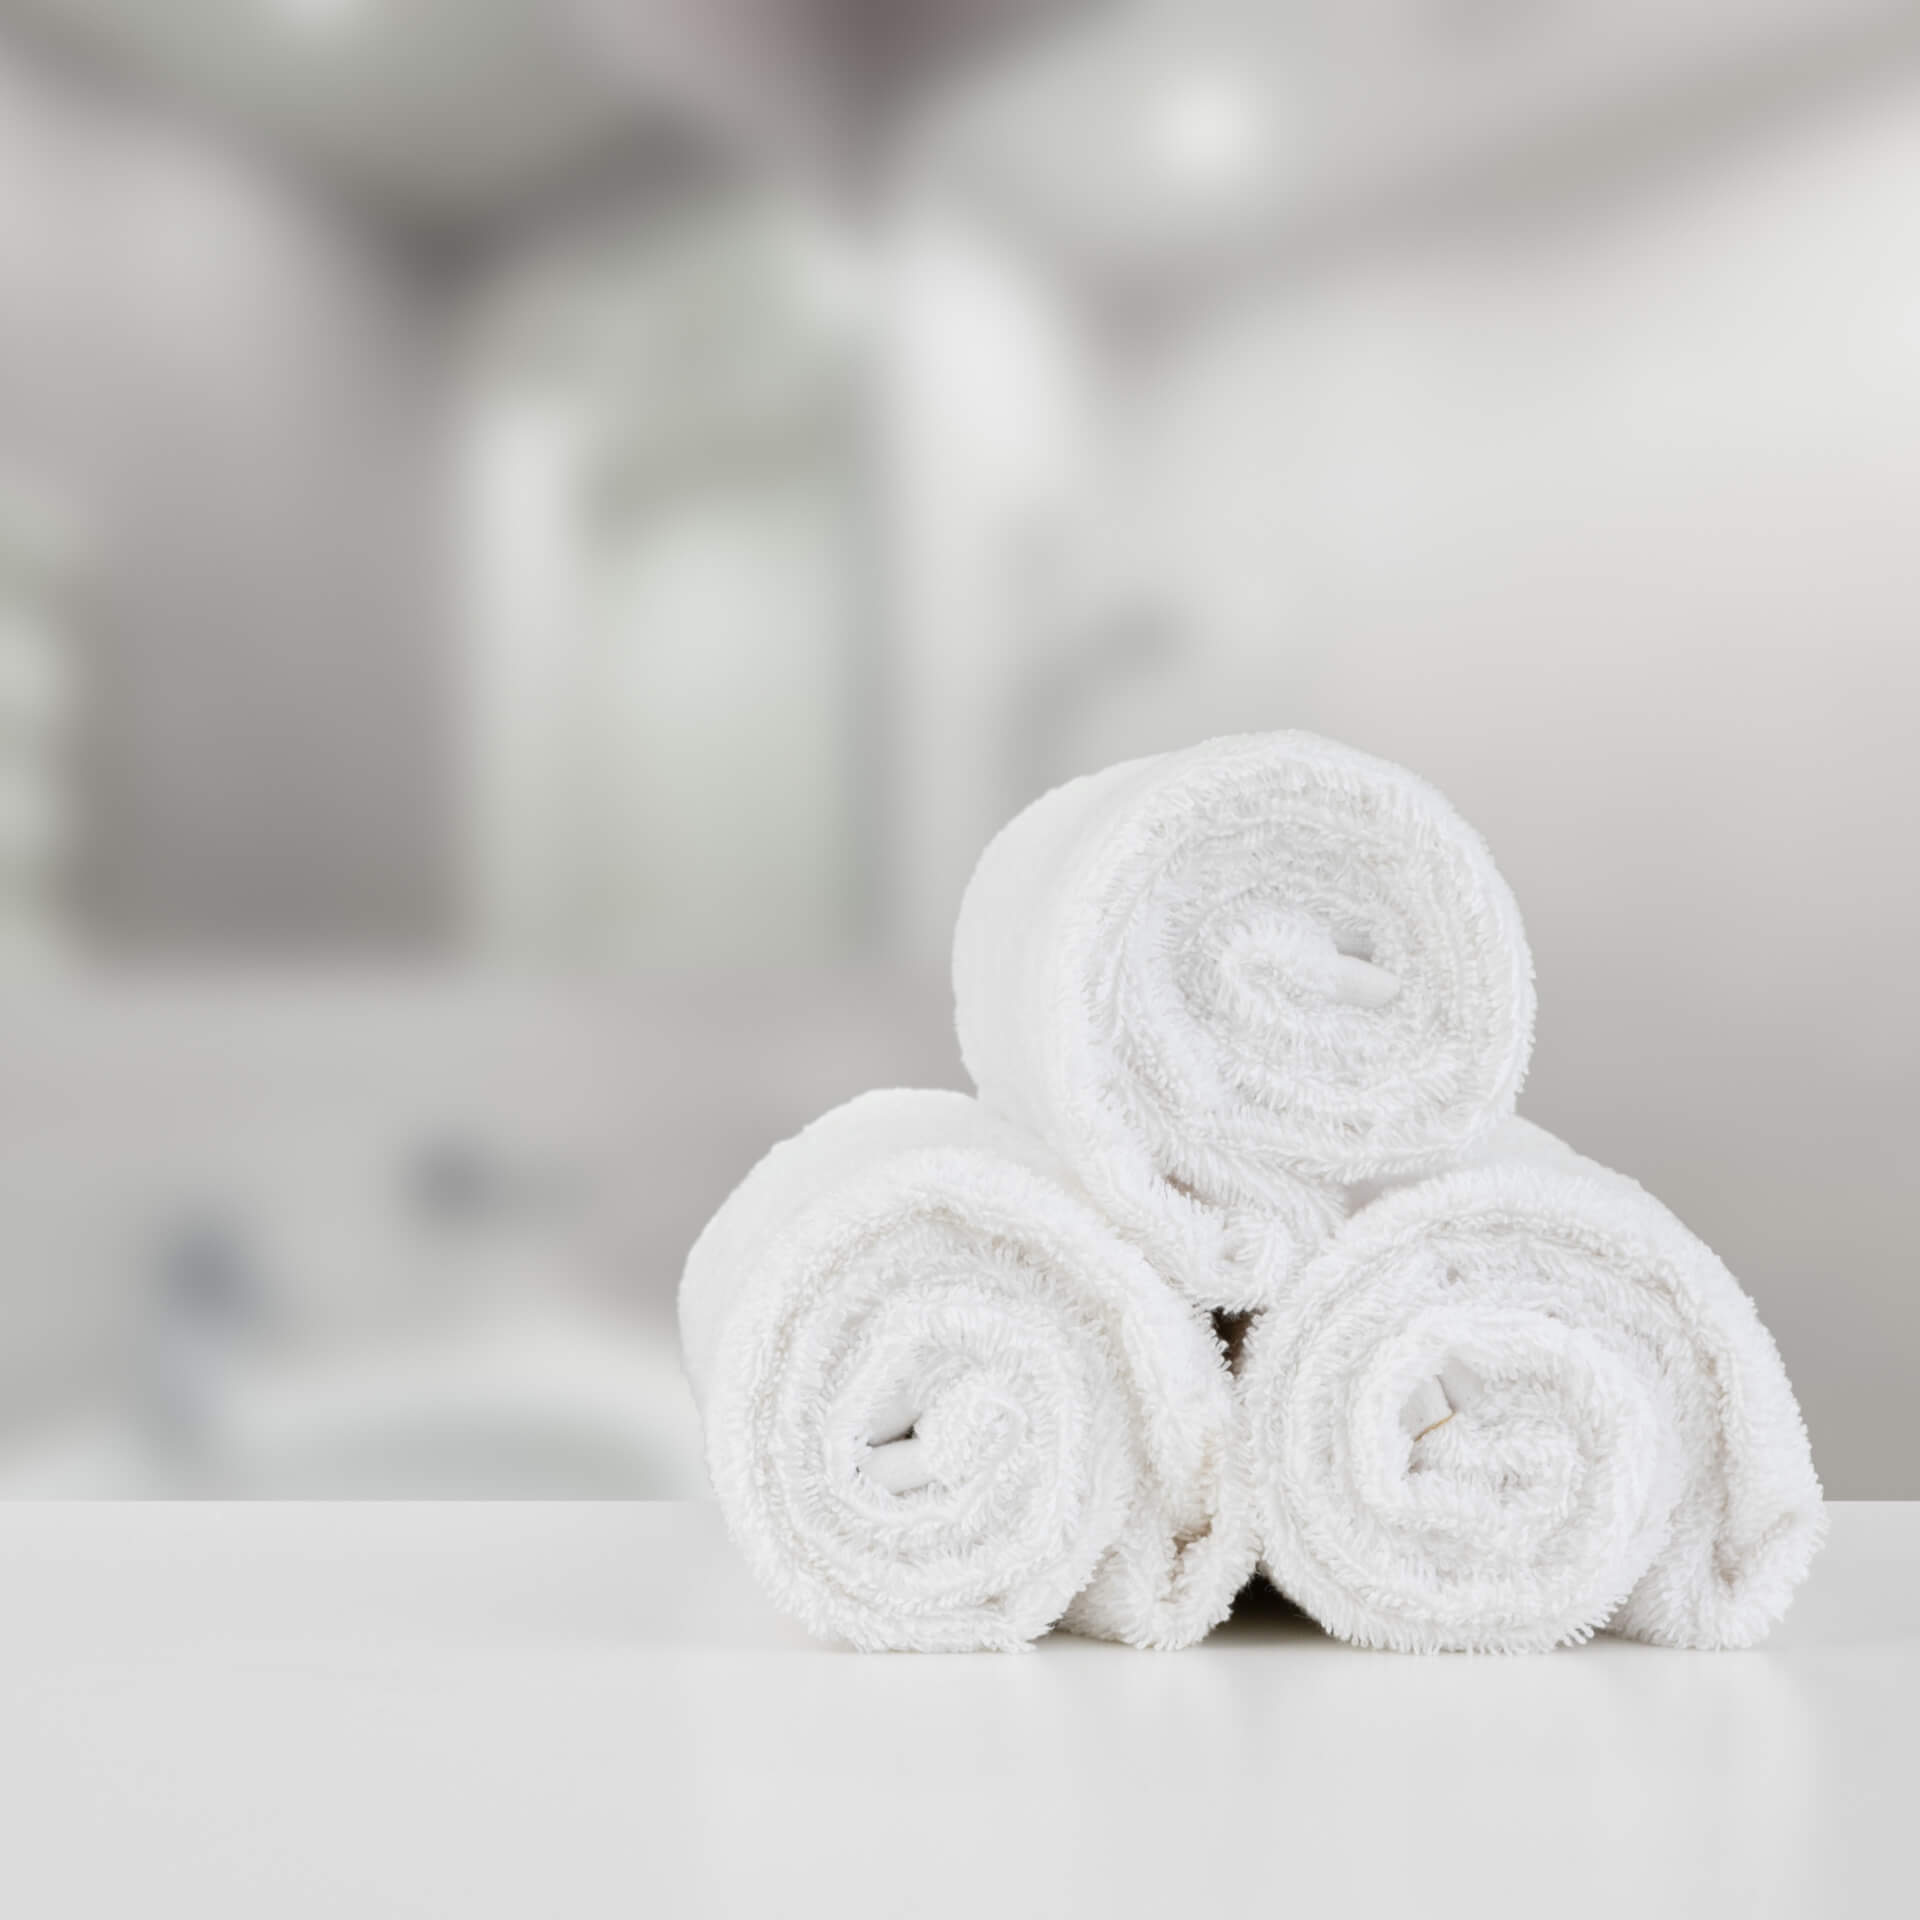 rolled-stacked-white-spa-towels-table-against-blurred-backgroundedit